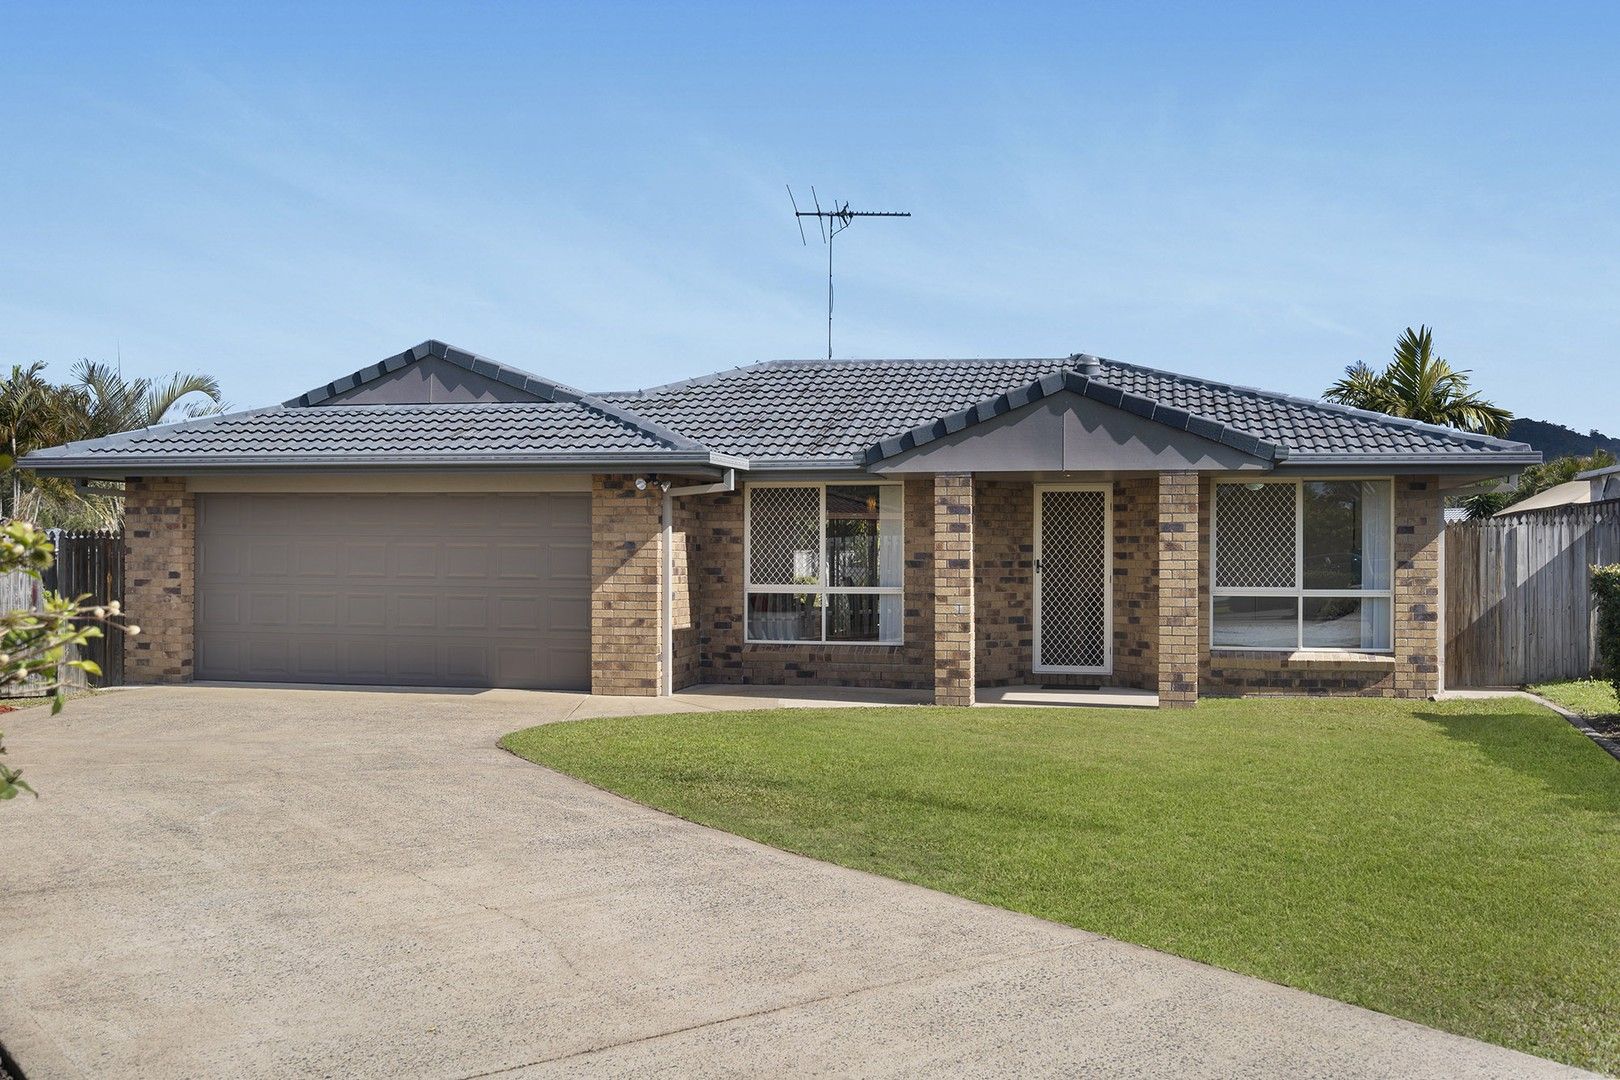 8 Parry Court, Windaroo QLD 4207 | Domain